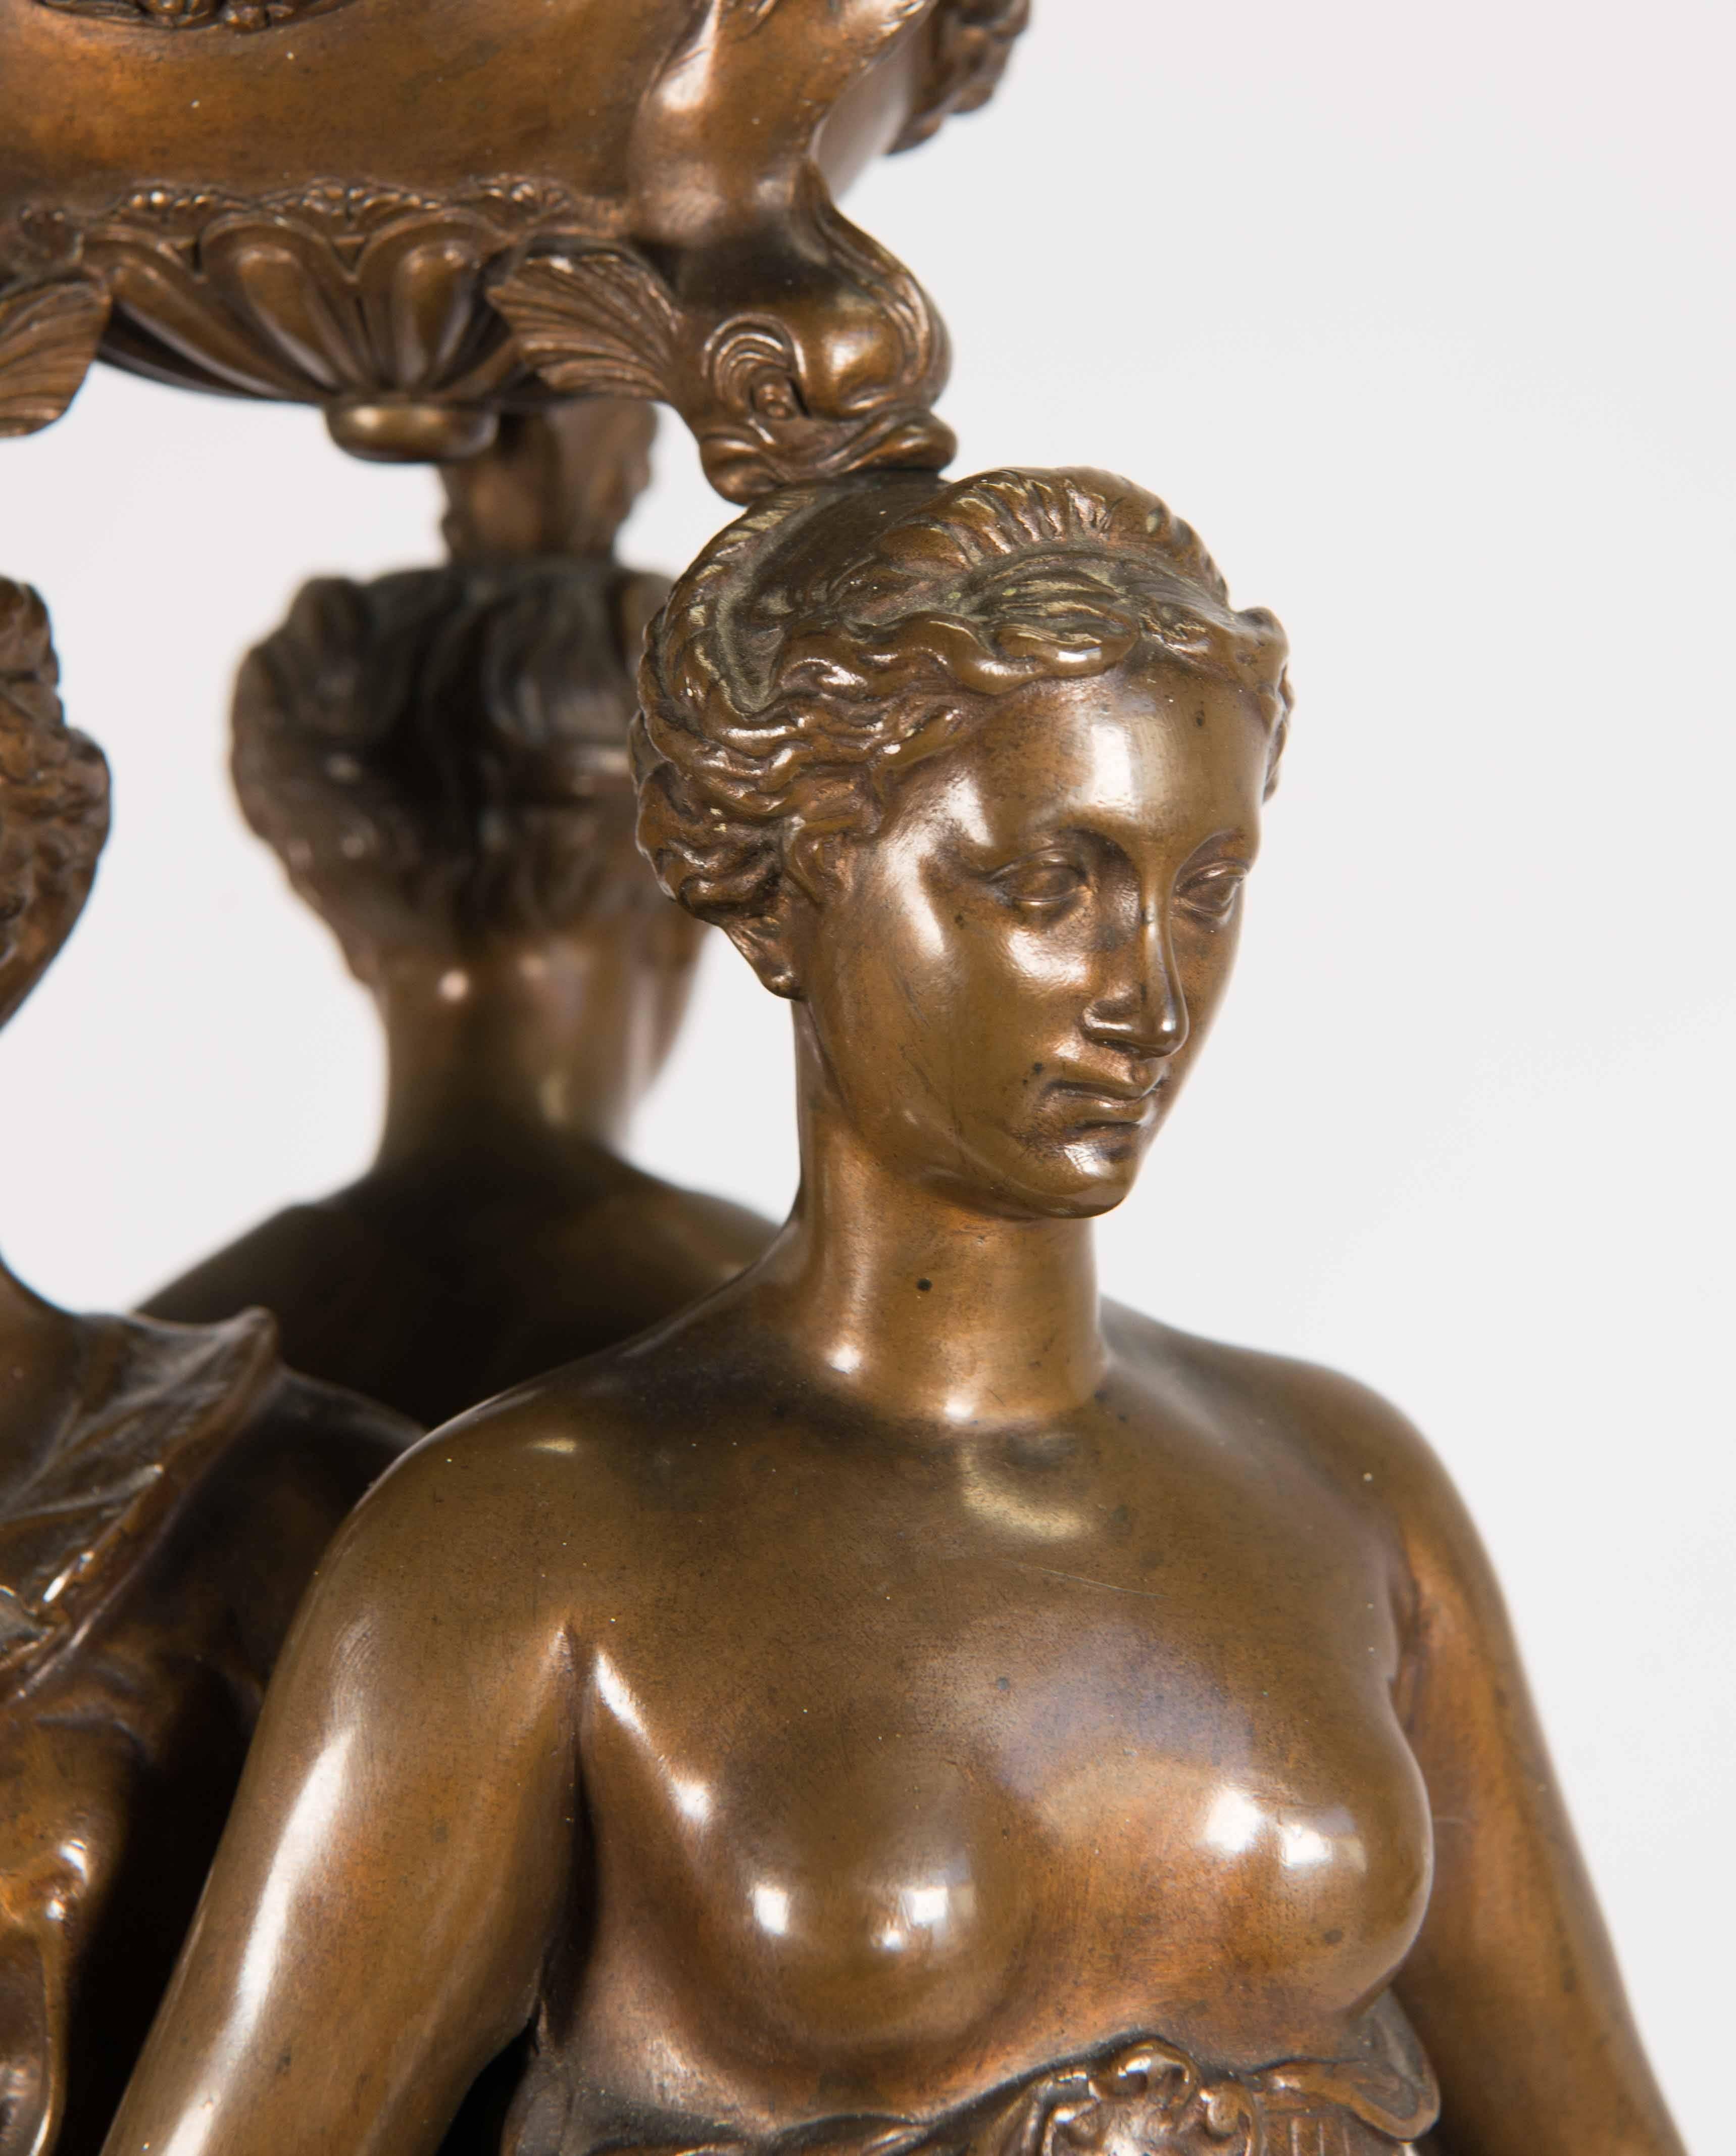 Well-known and respected for its quality bronze statues is Ferdinand Barbedienne. He was a metalworker during the 19th century. This is a statue of the three graces, after the model by Germain Pilon. The statue is 61 cm high and also has the stamp